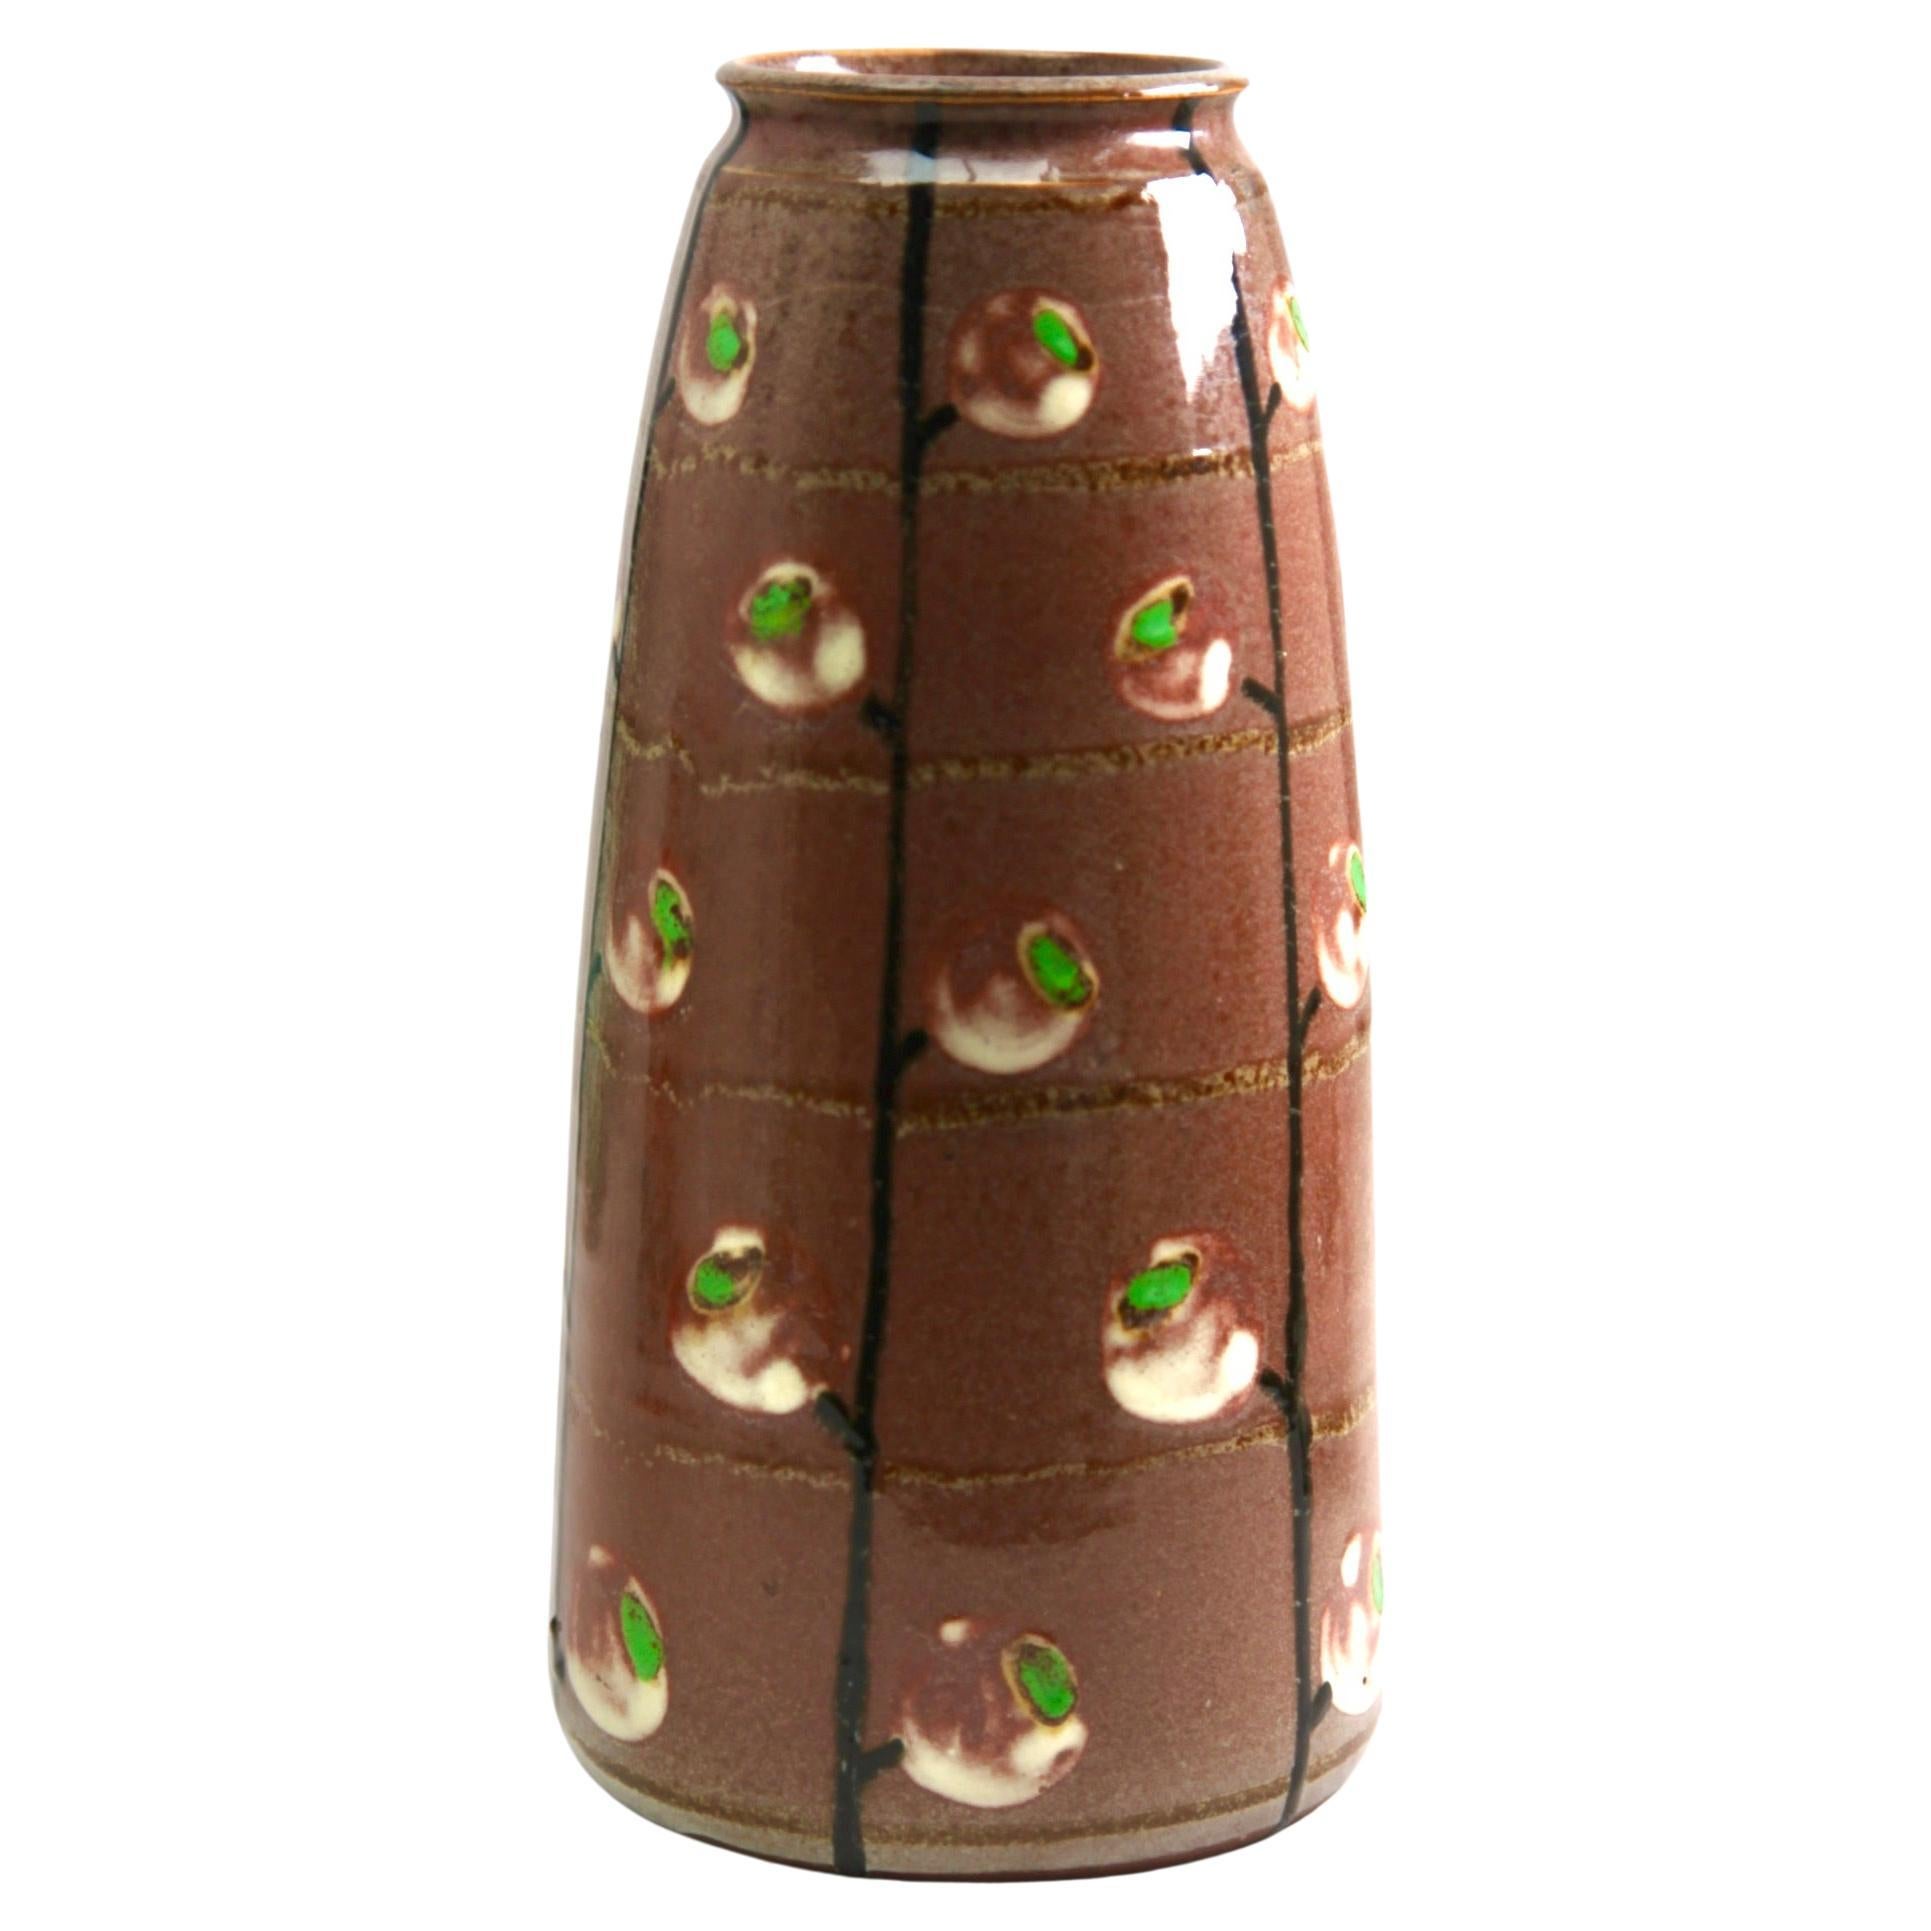 Ceramic Vase Beautiful Glaze in Shades of Brown and Green, Elsace, France, 1930s